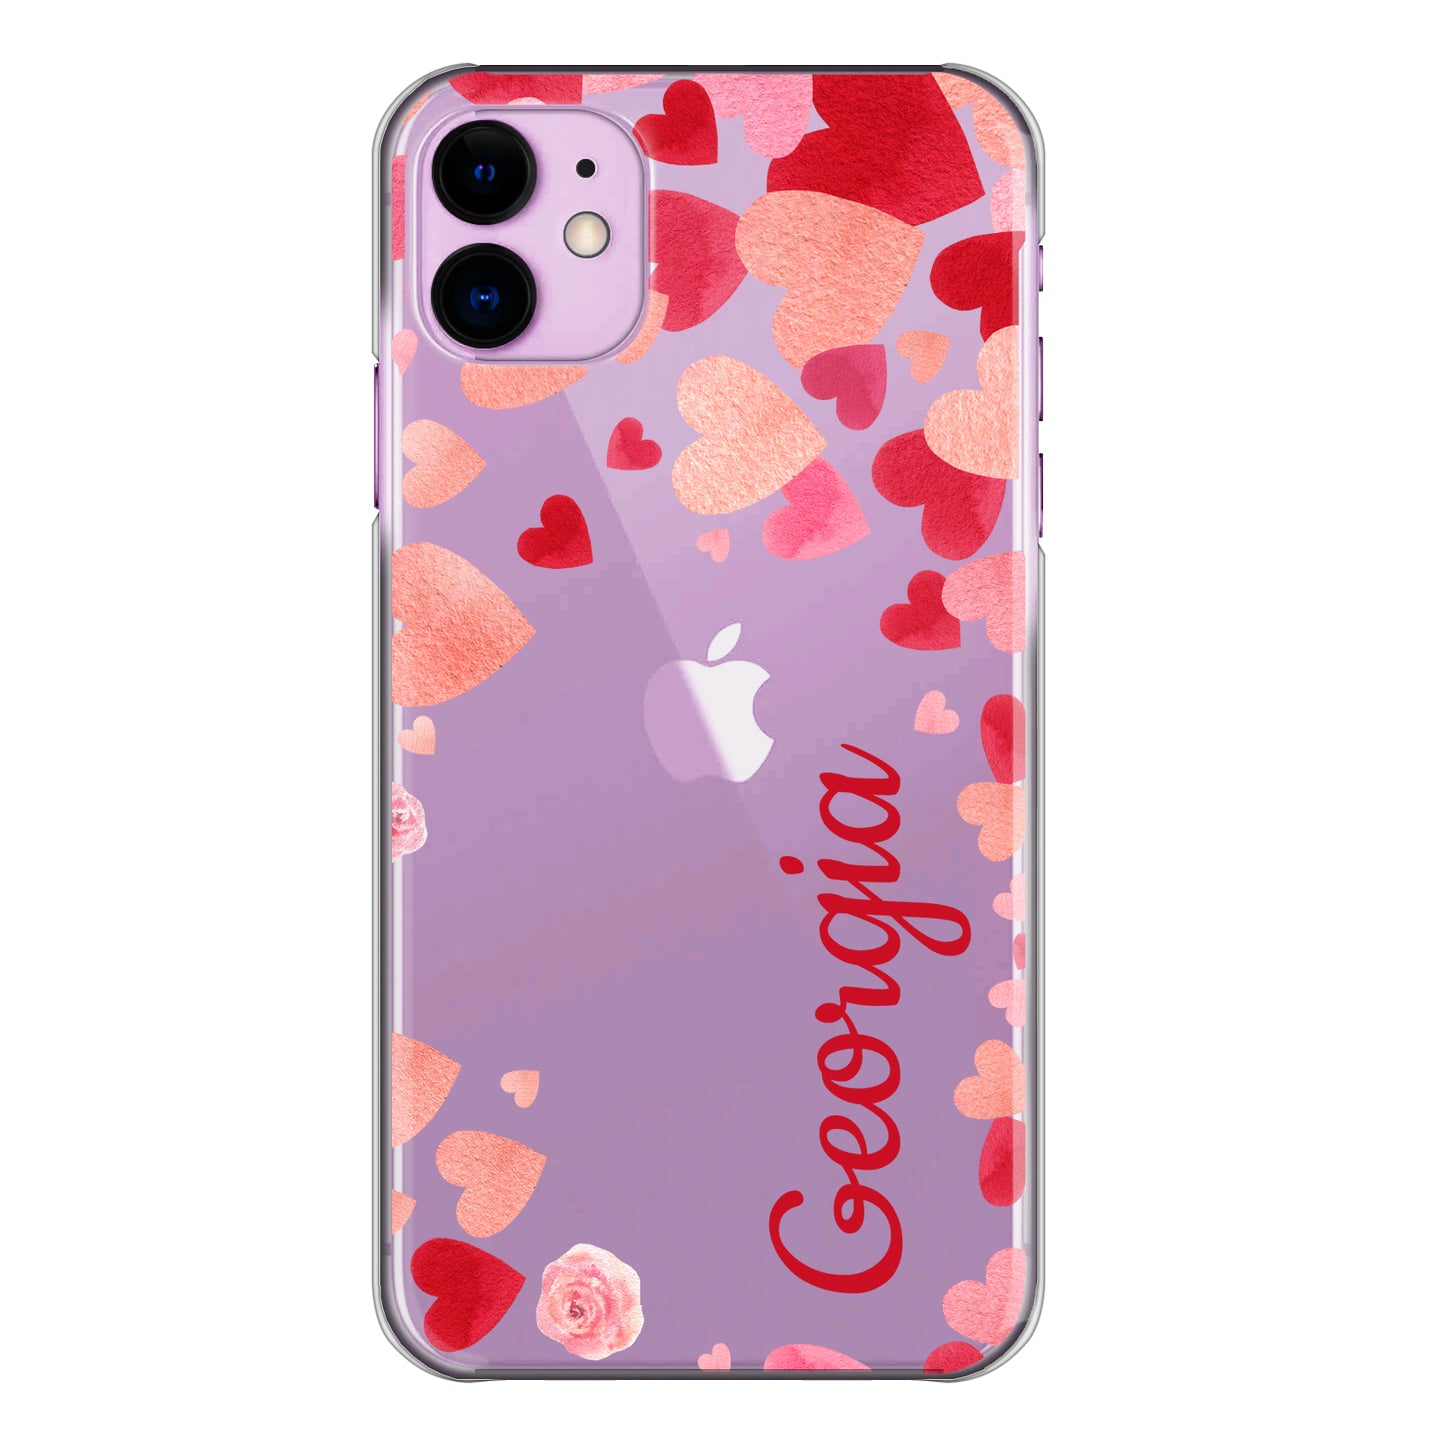 Personalised Apple iPhone Hard Case with Hearts/Roses and Stylish Red Text